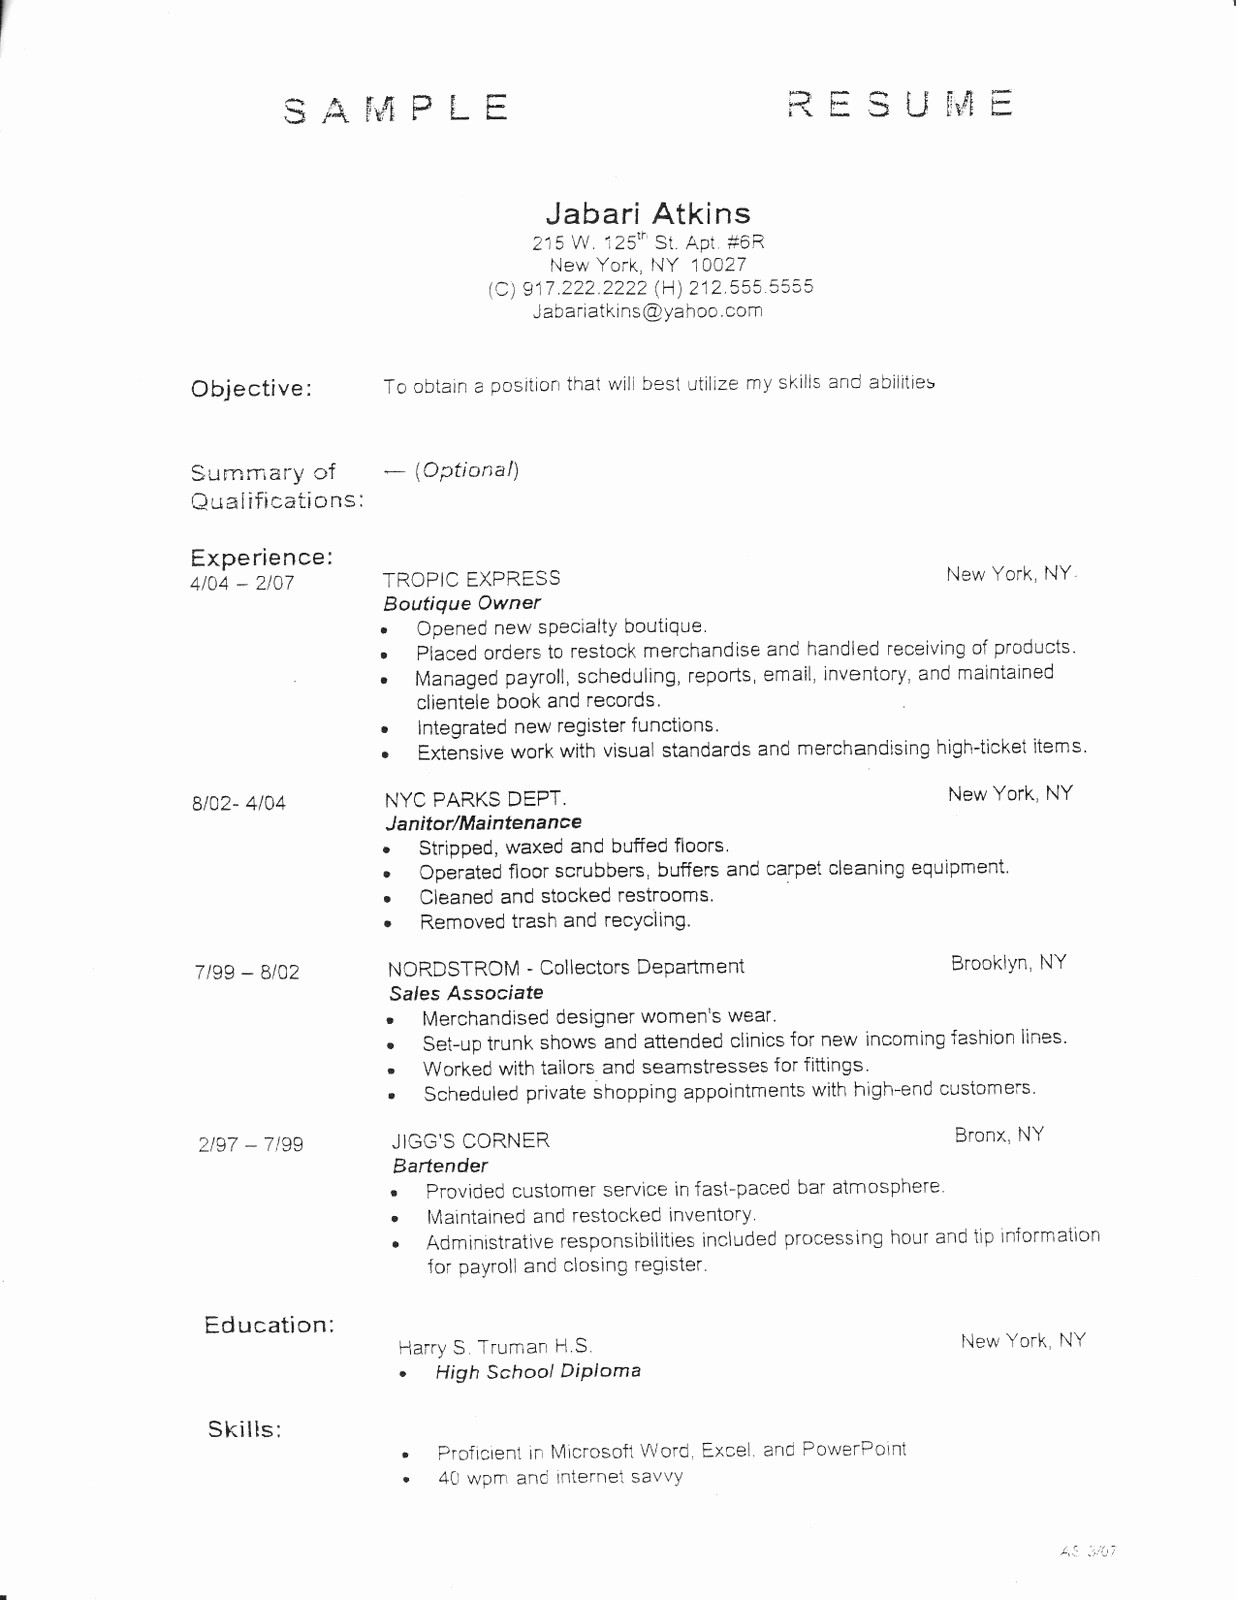 Samples Of A Basic Resume Fresh Sample Resume Outlines Search Results